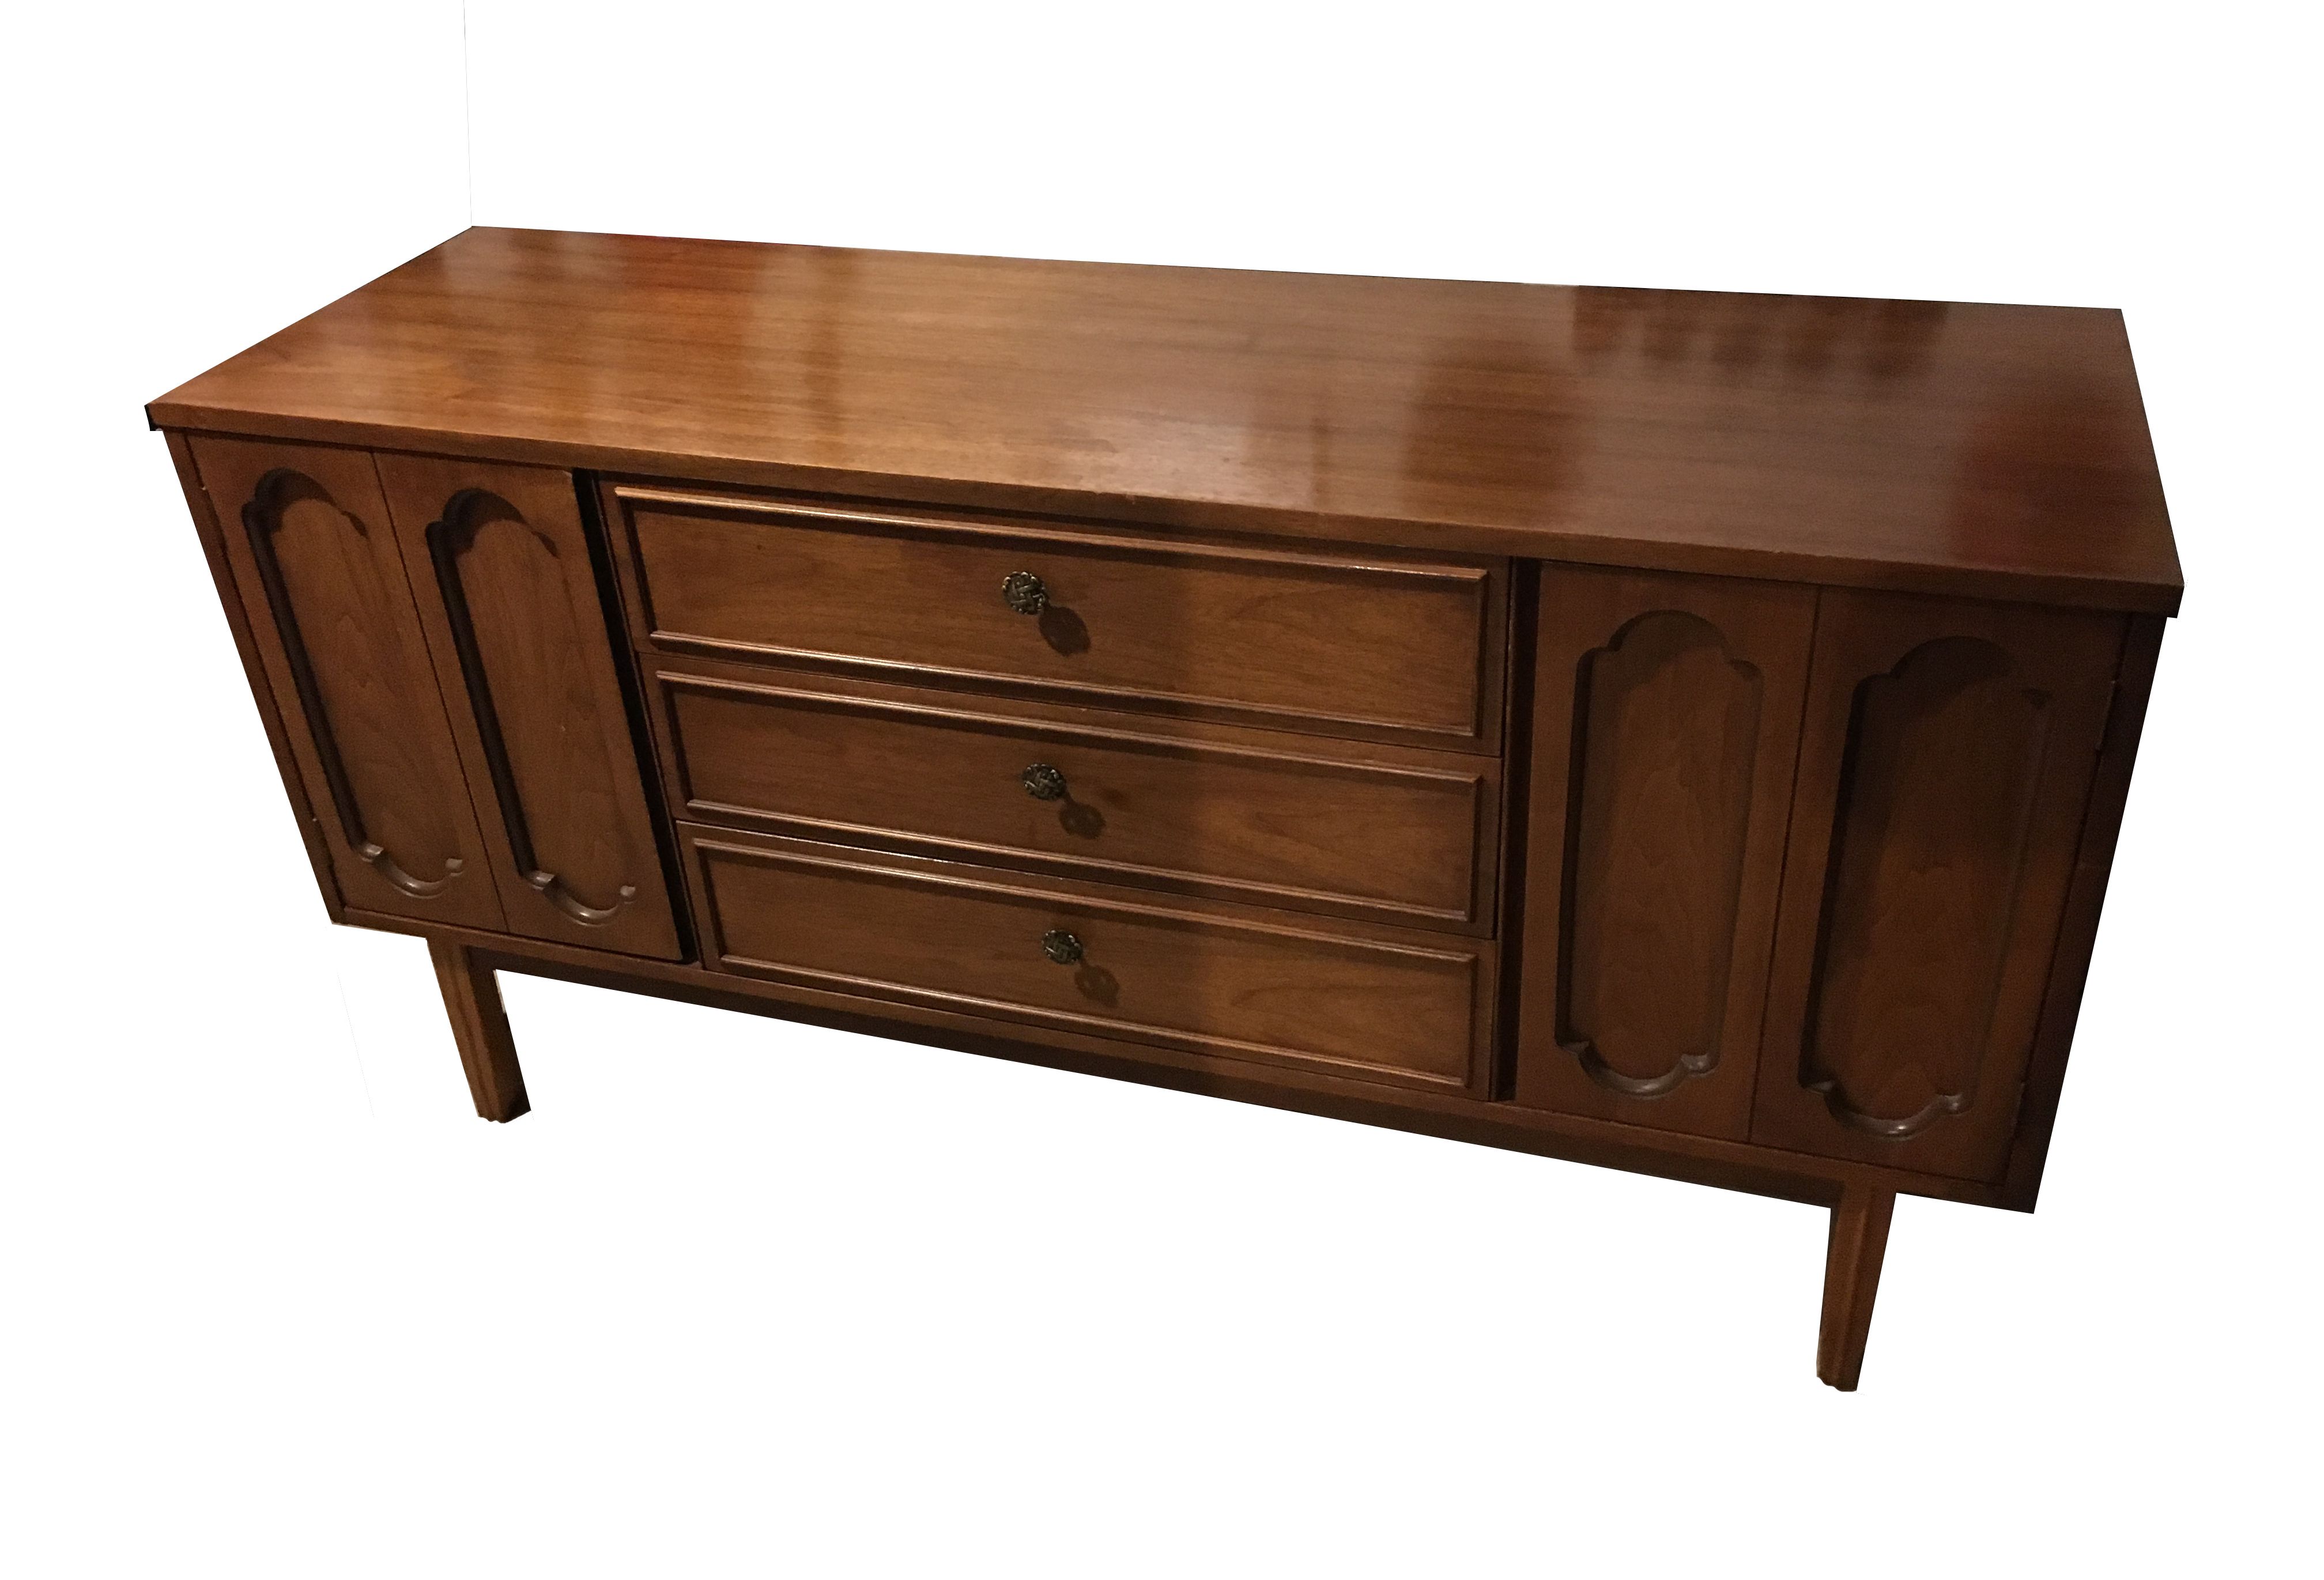 Dixie Mid Century Modern Buffet For Sale | Antiques With Modern Mid Century Buffets (View 15 of 20)